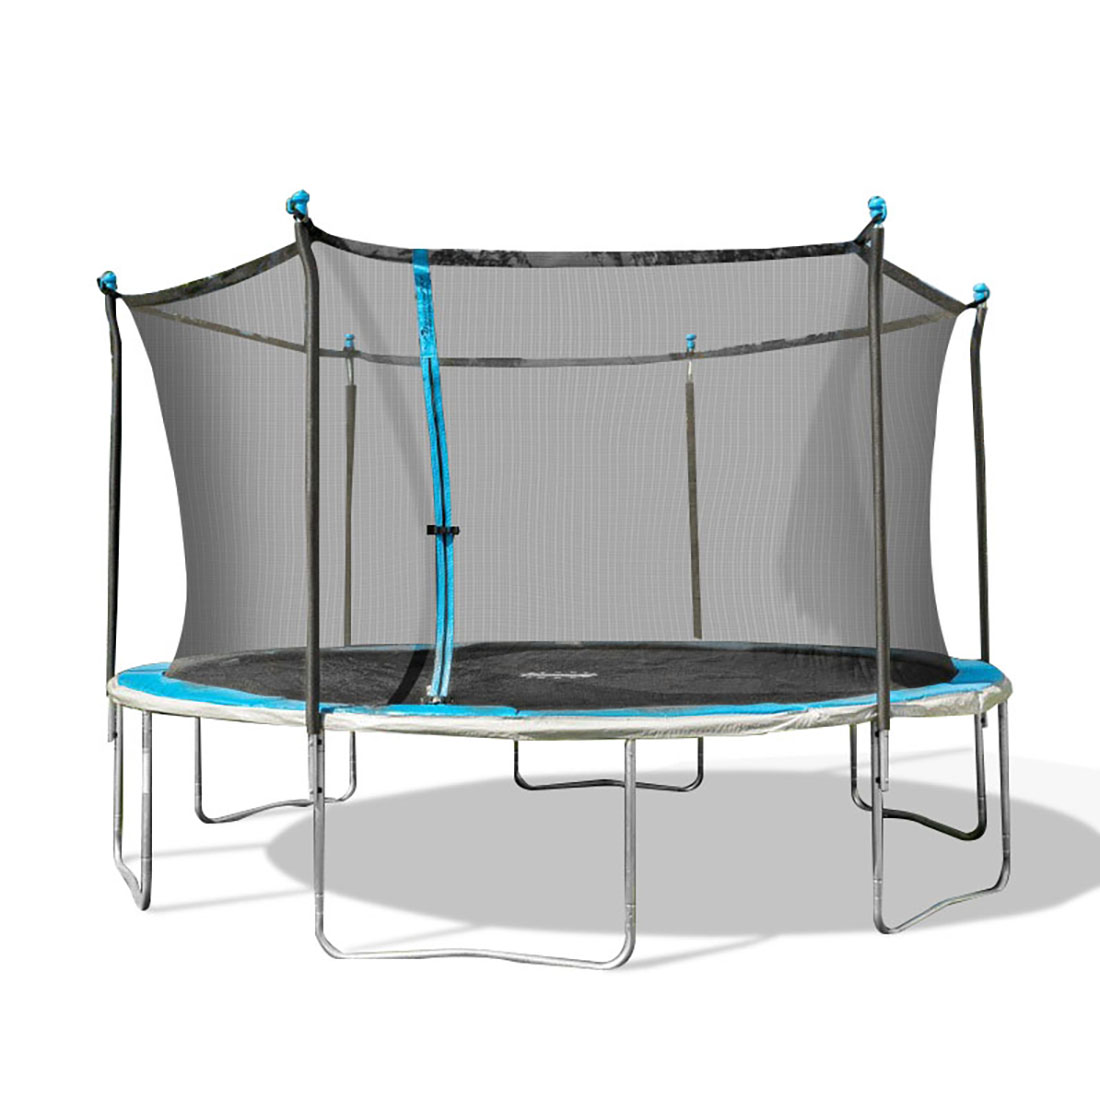 Bounce Pro 14ft Trampoline with Flash Lite Zone - image 1 of 3